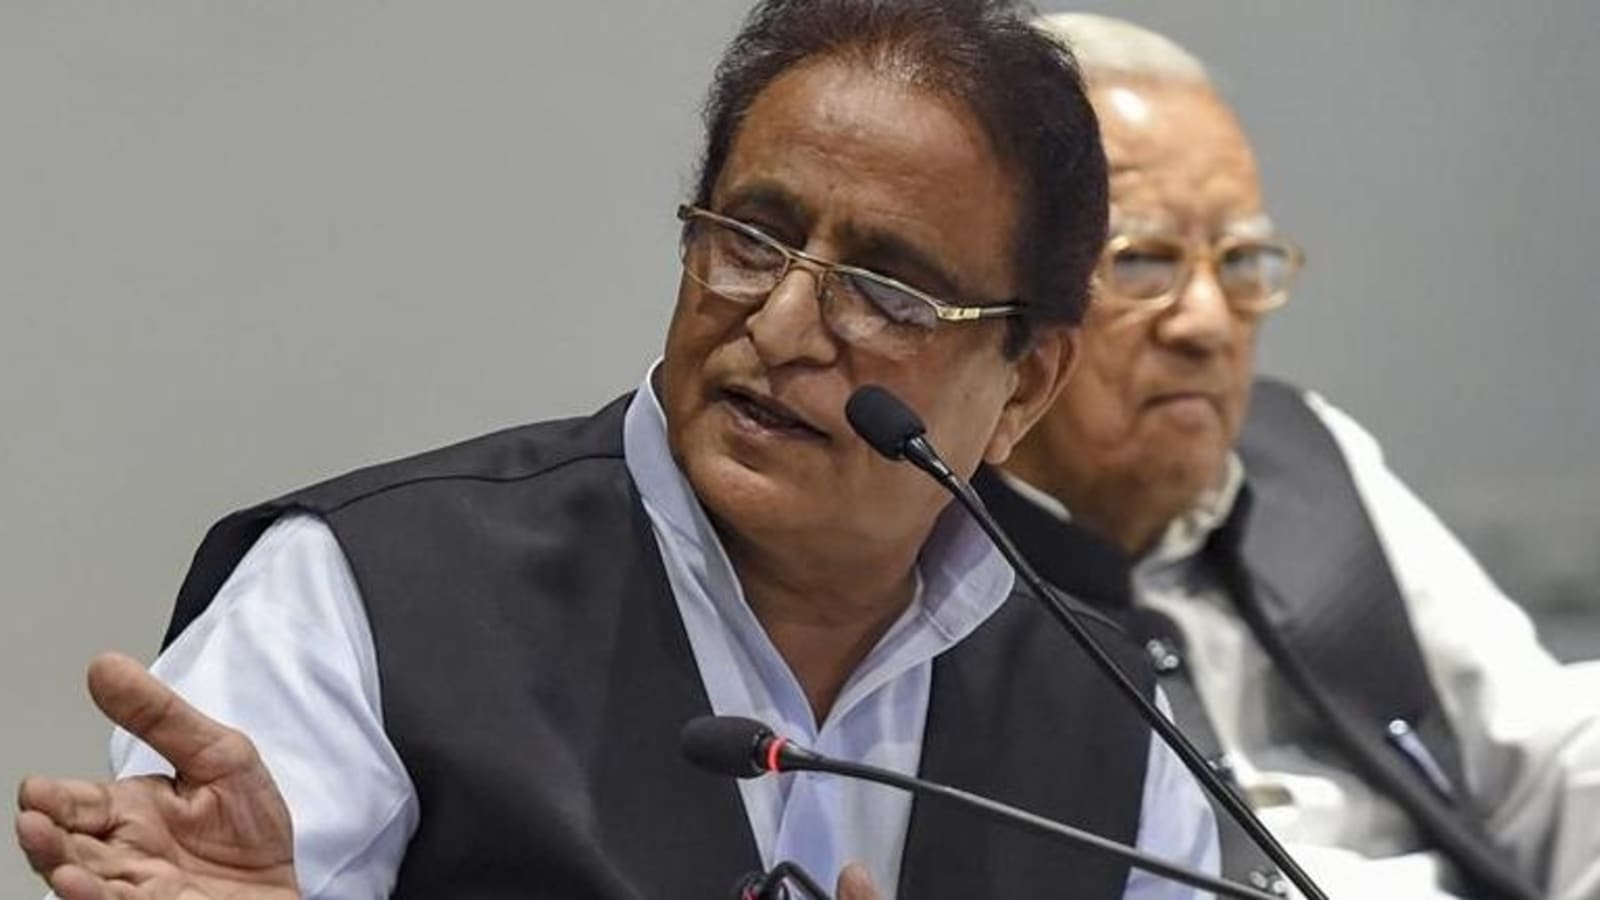 SP leader Azam Khan shifted to Covid-19 ICU of Lucknow hospital - Hindustan  Times